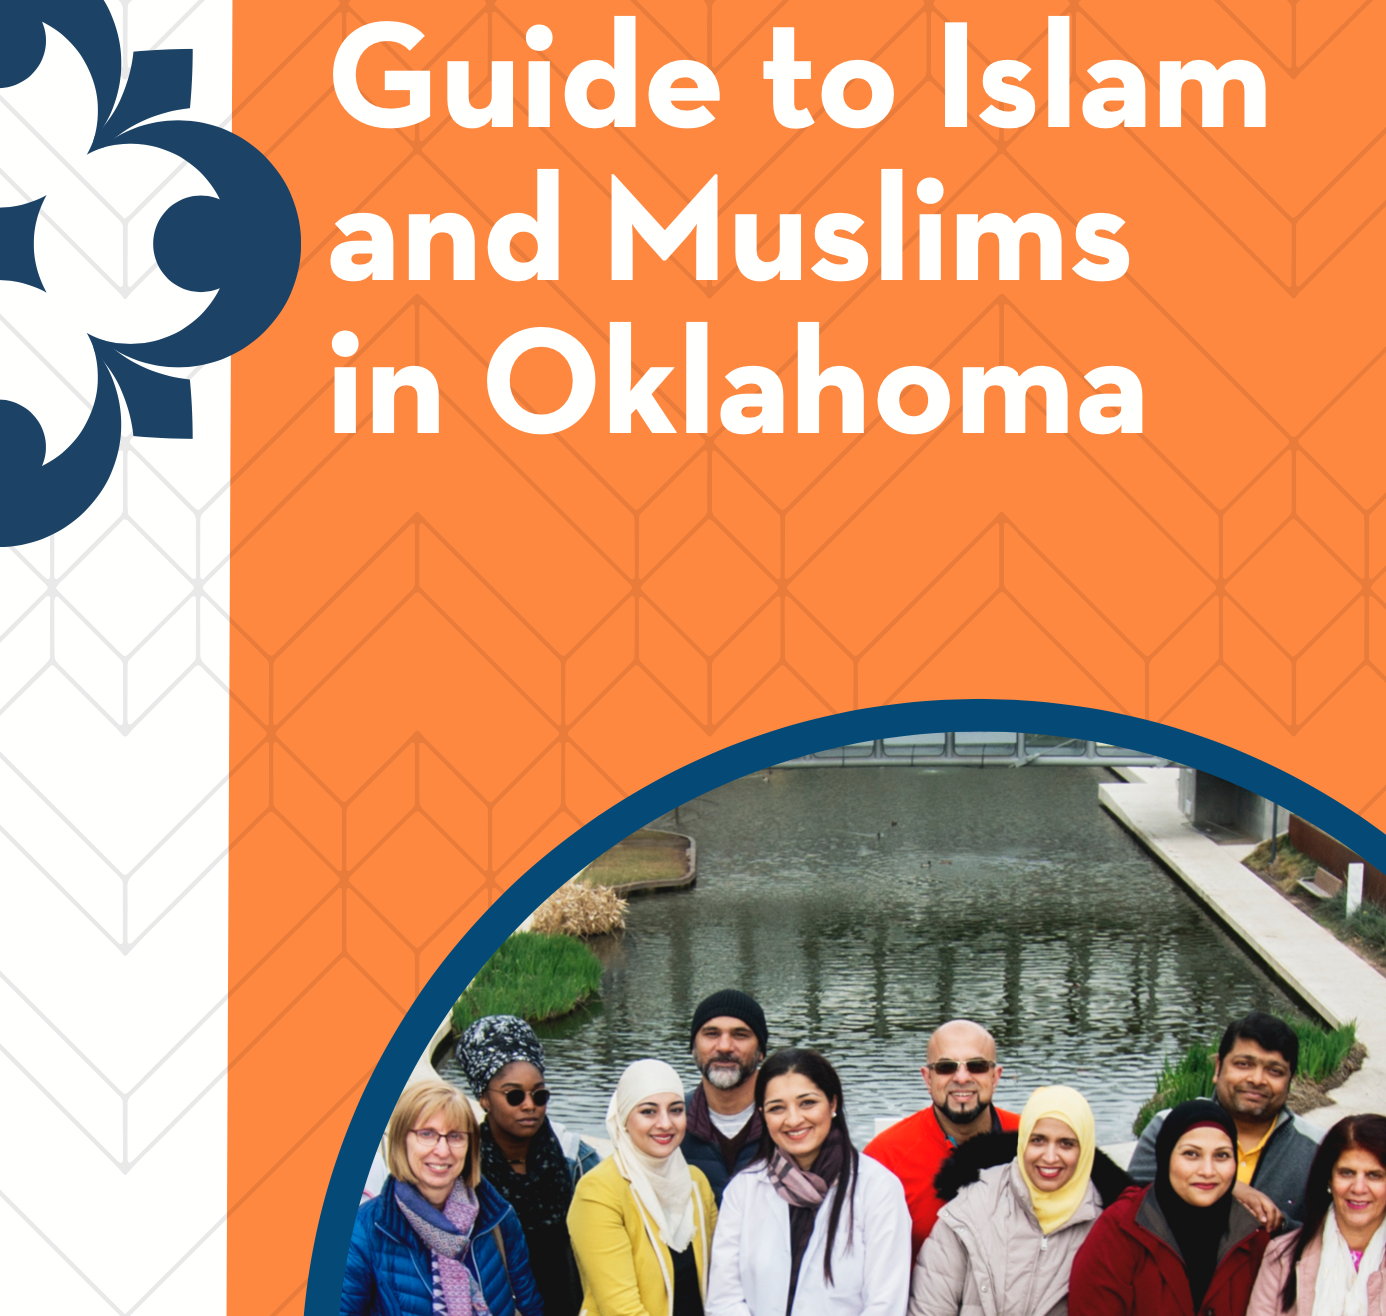 Guide to Islam and Muslims in Oklahoma